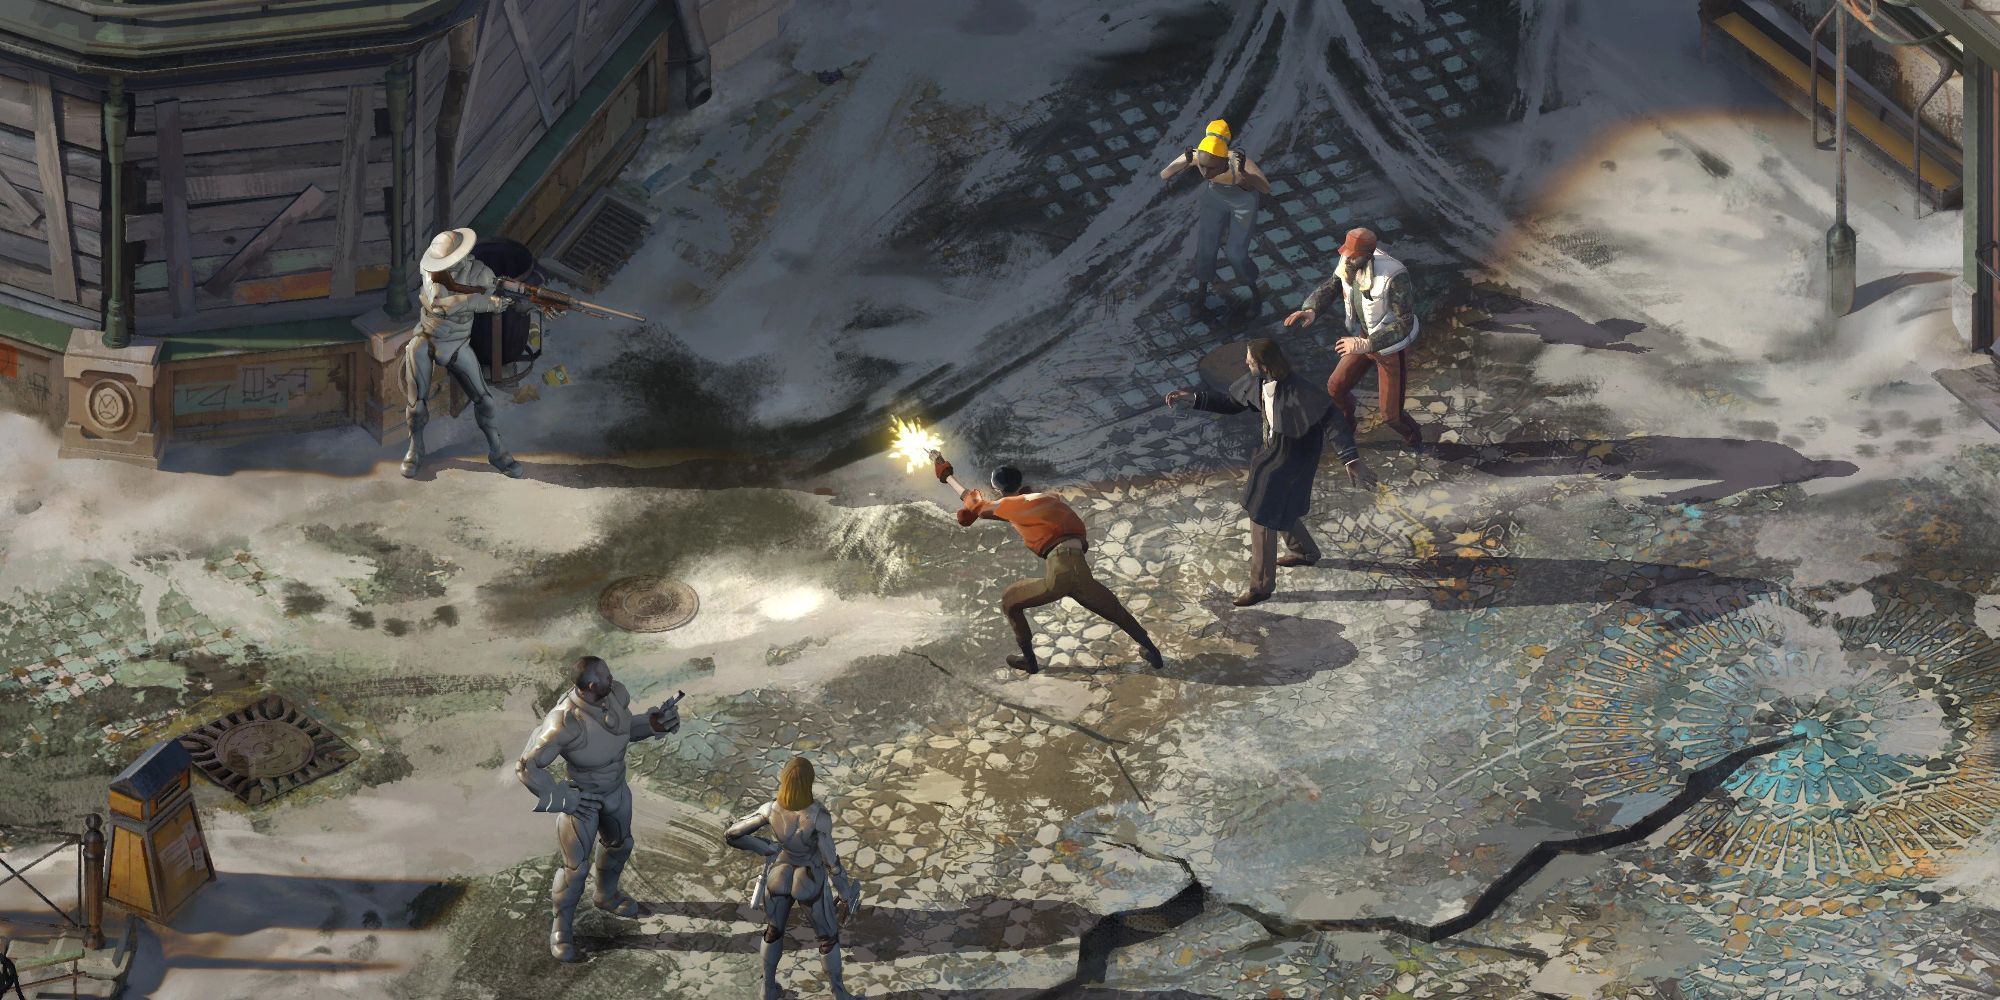 An image from Disco Elysium showing two characters having a gunfight